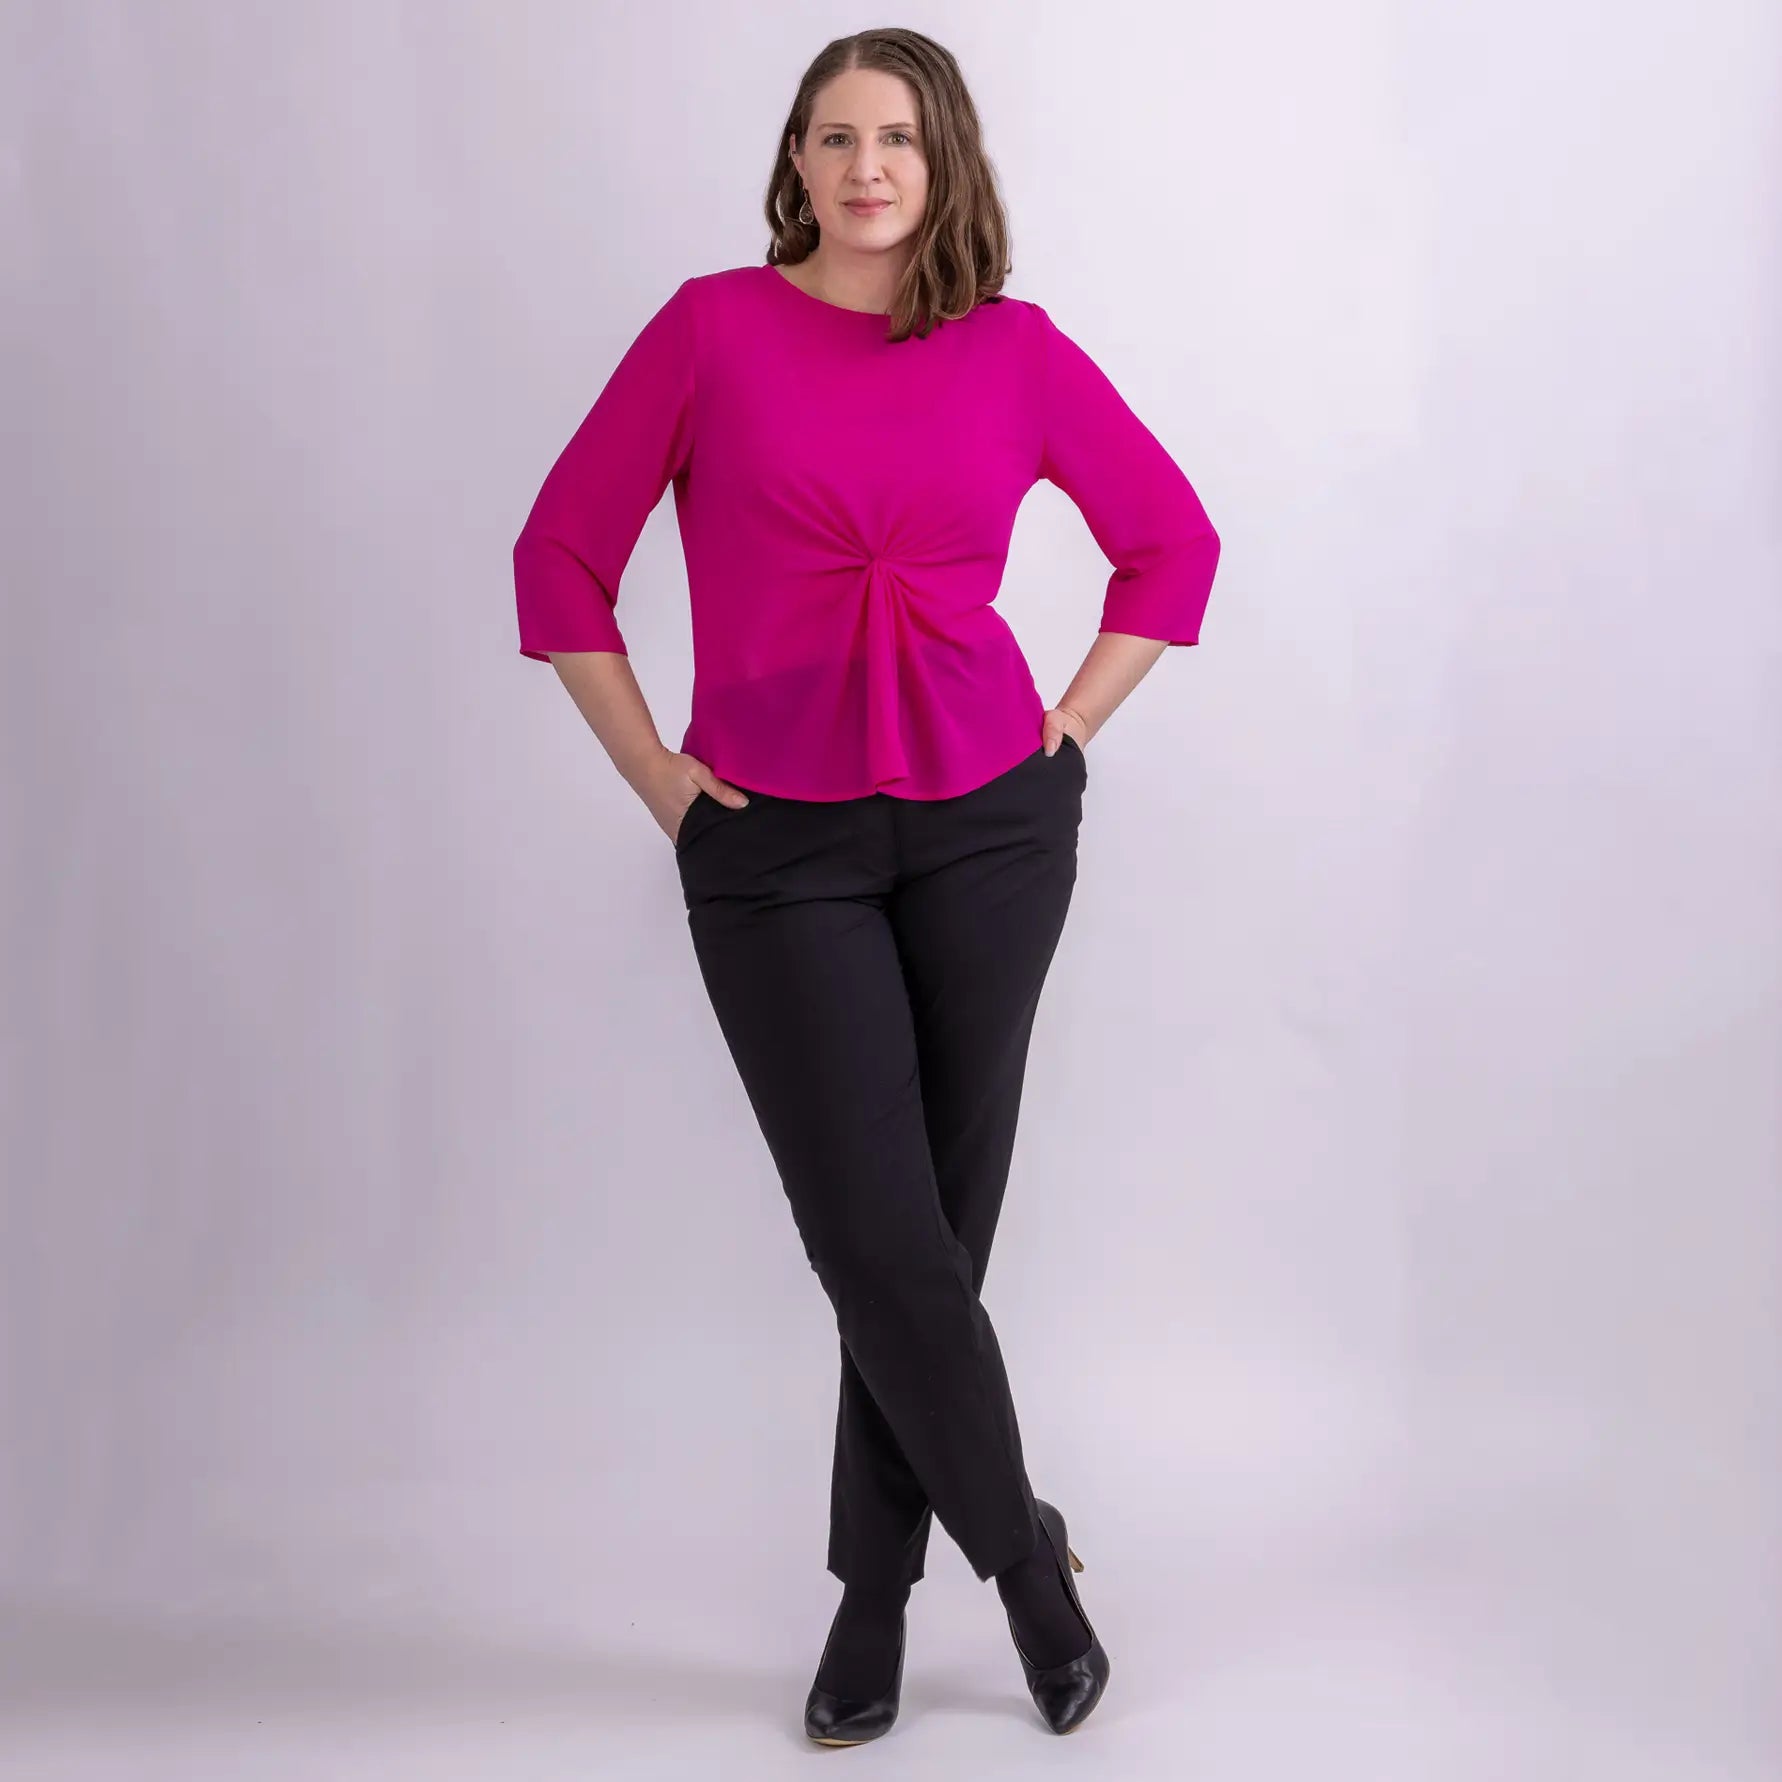 hot pink chiffon top with 3/4 sleeves from designer desiree